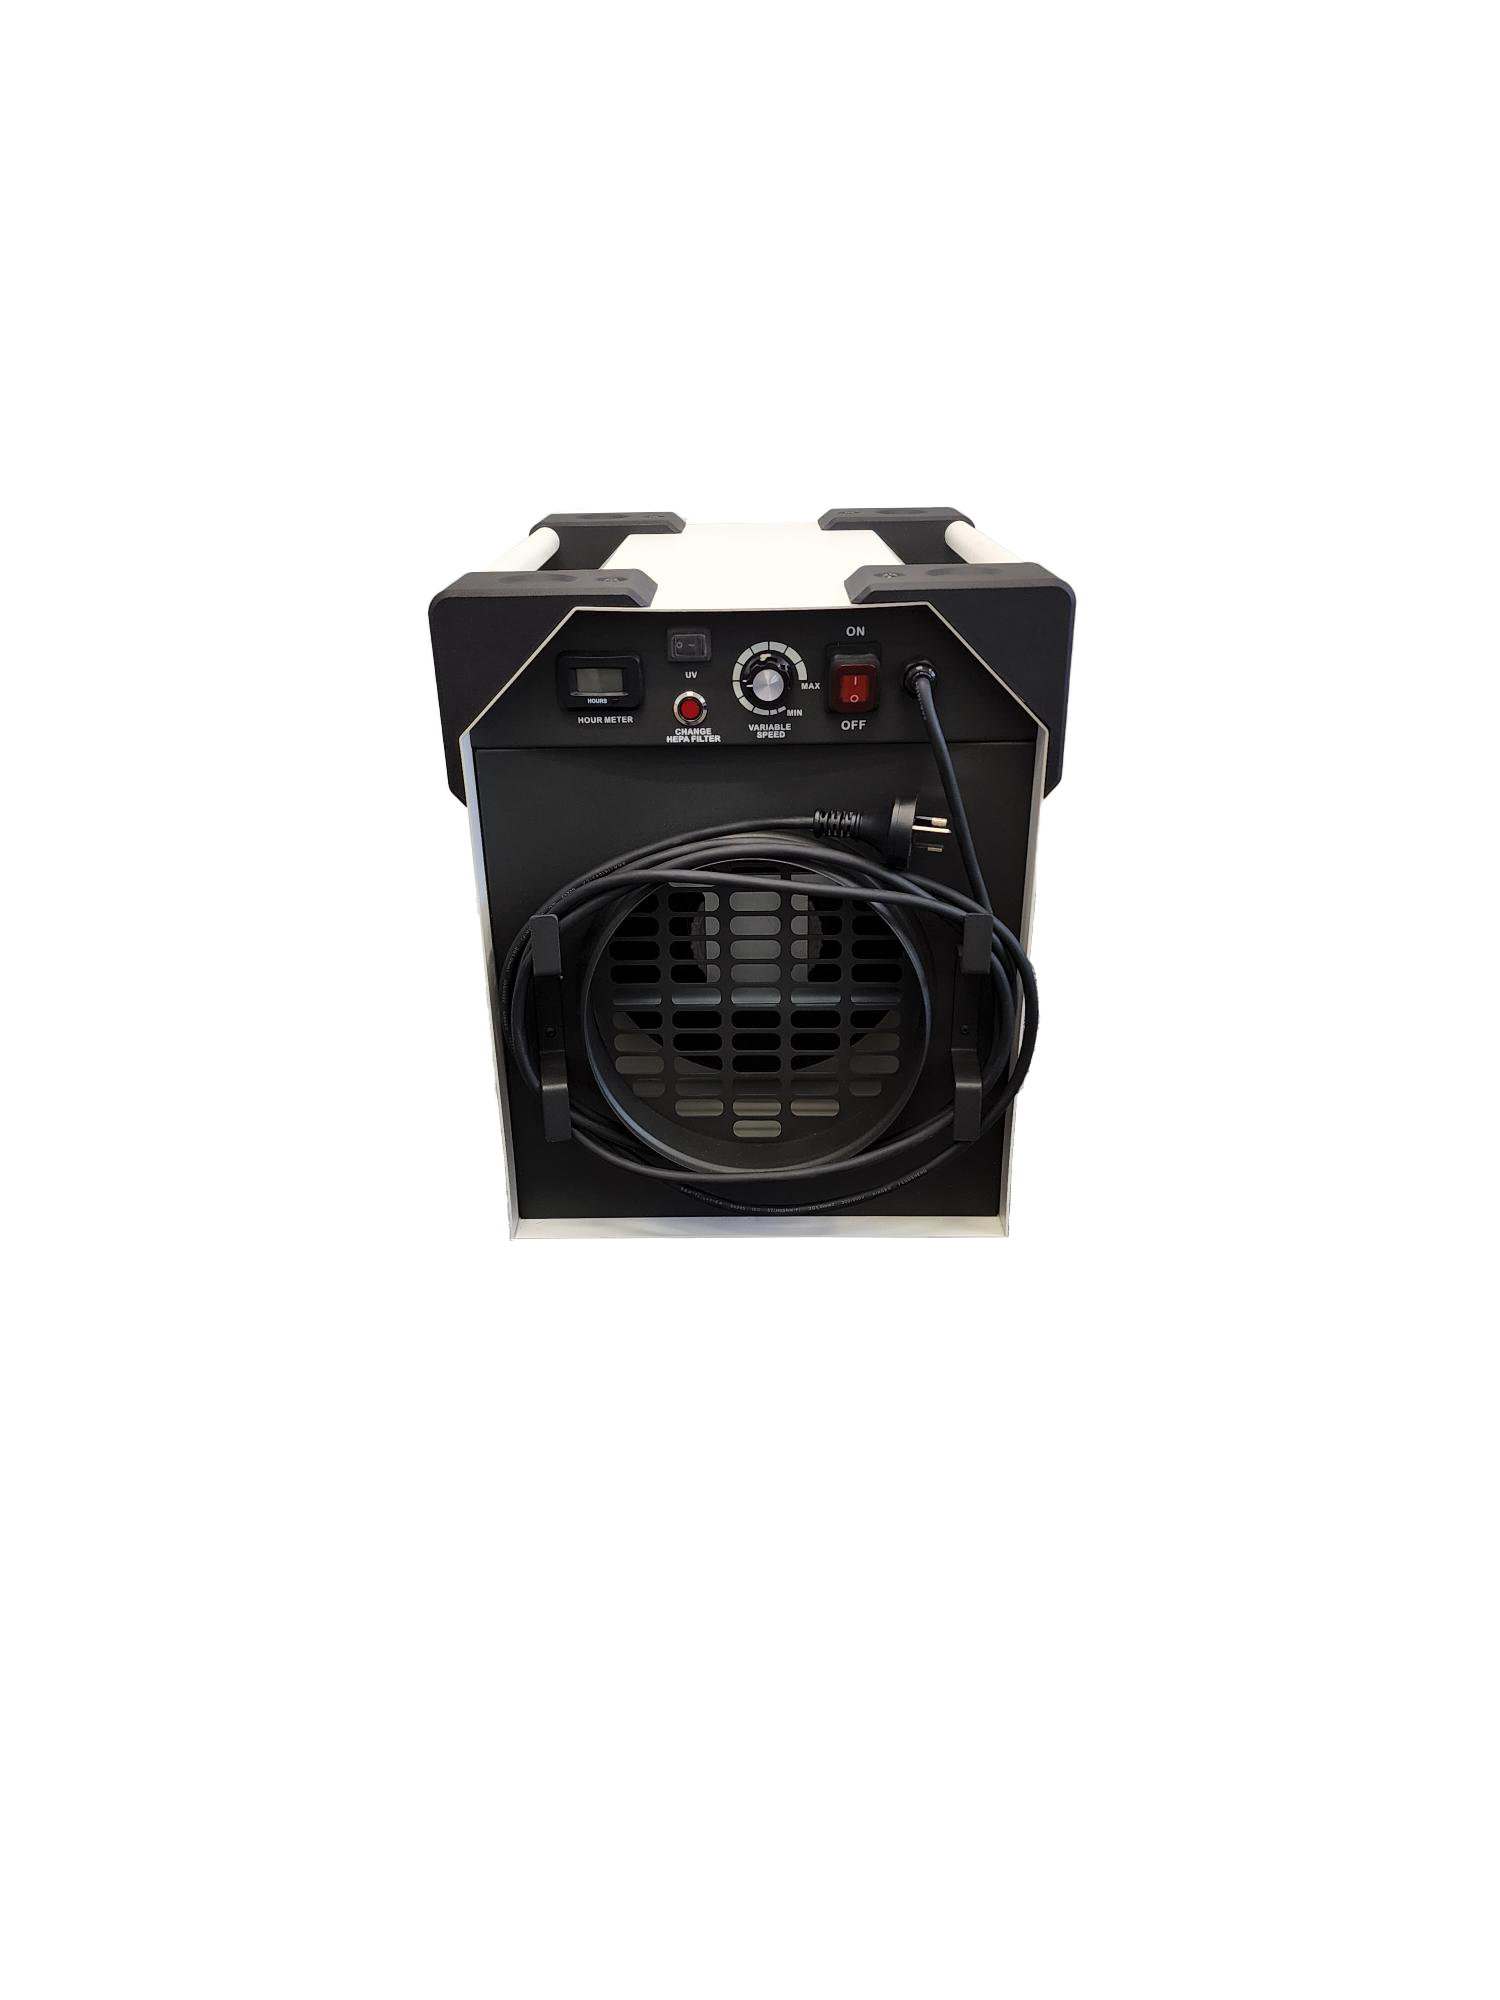 Air Scrubber Purifier / Industrial Heating Cooling Ventilation Distribution Fans Warehouse Australia / Fanmaster